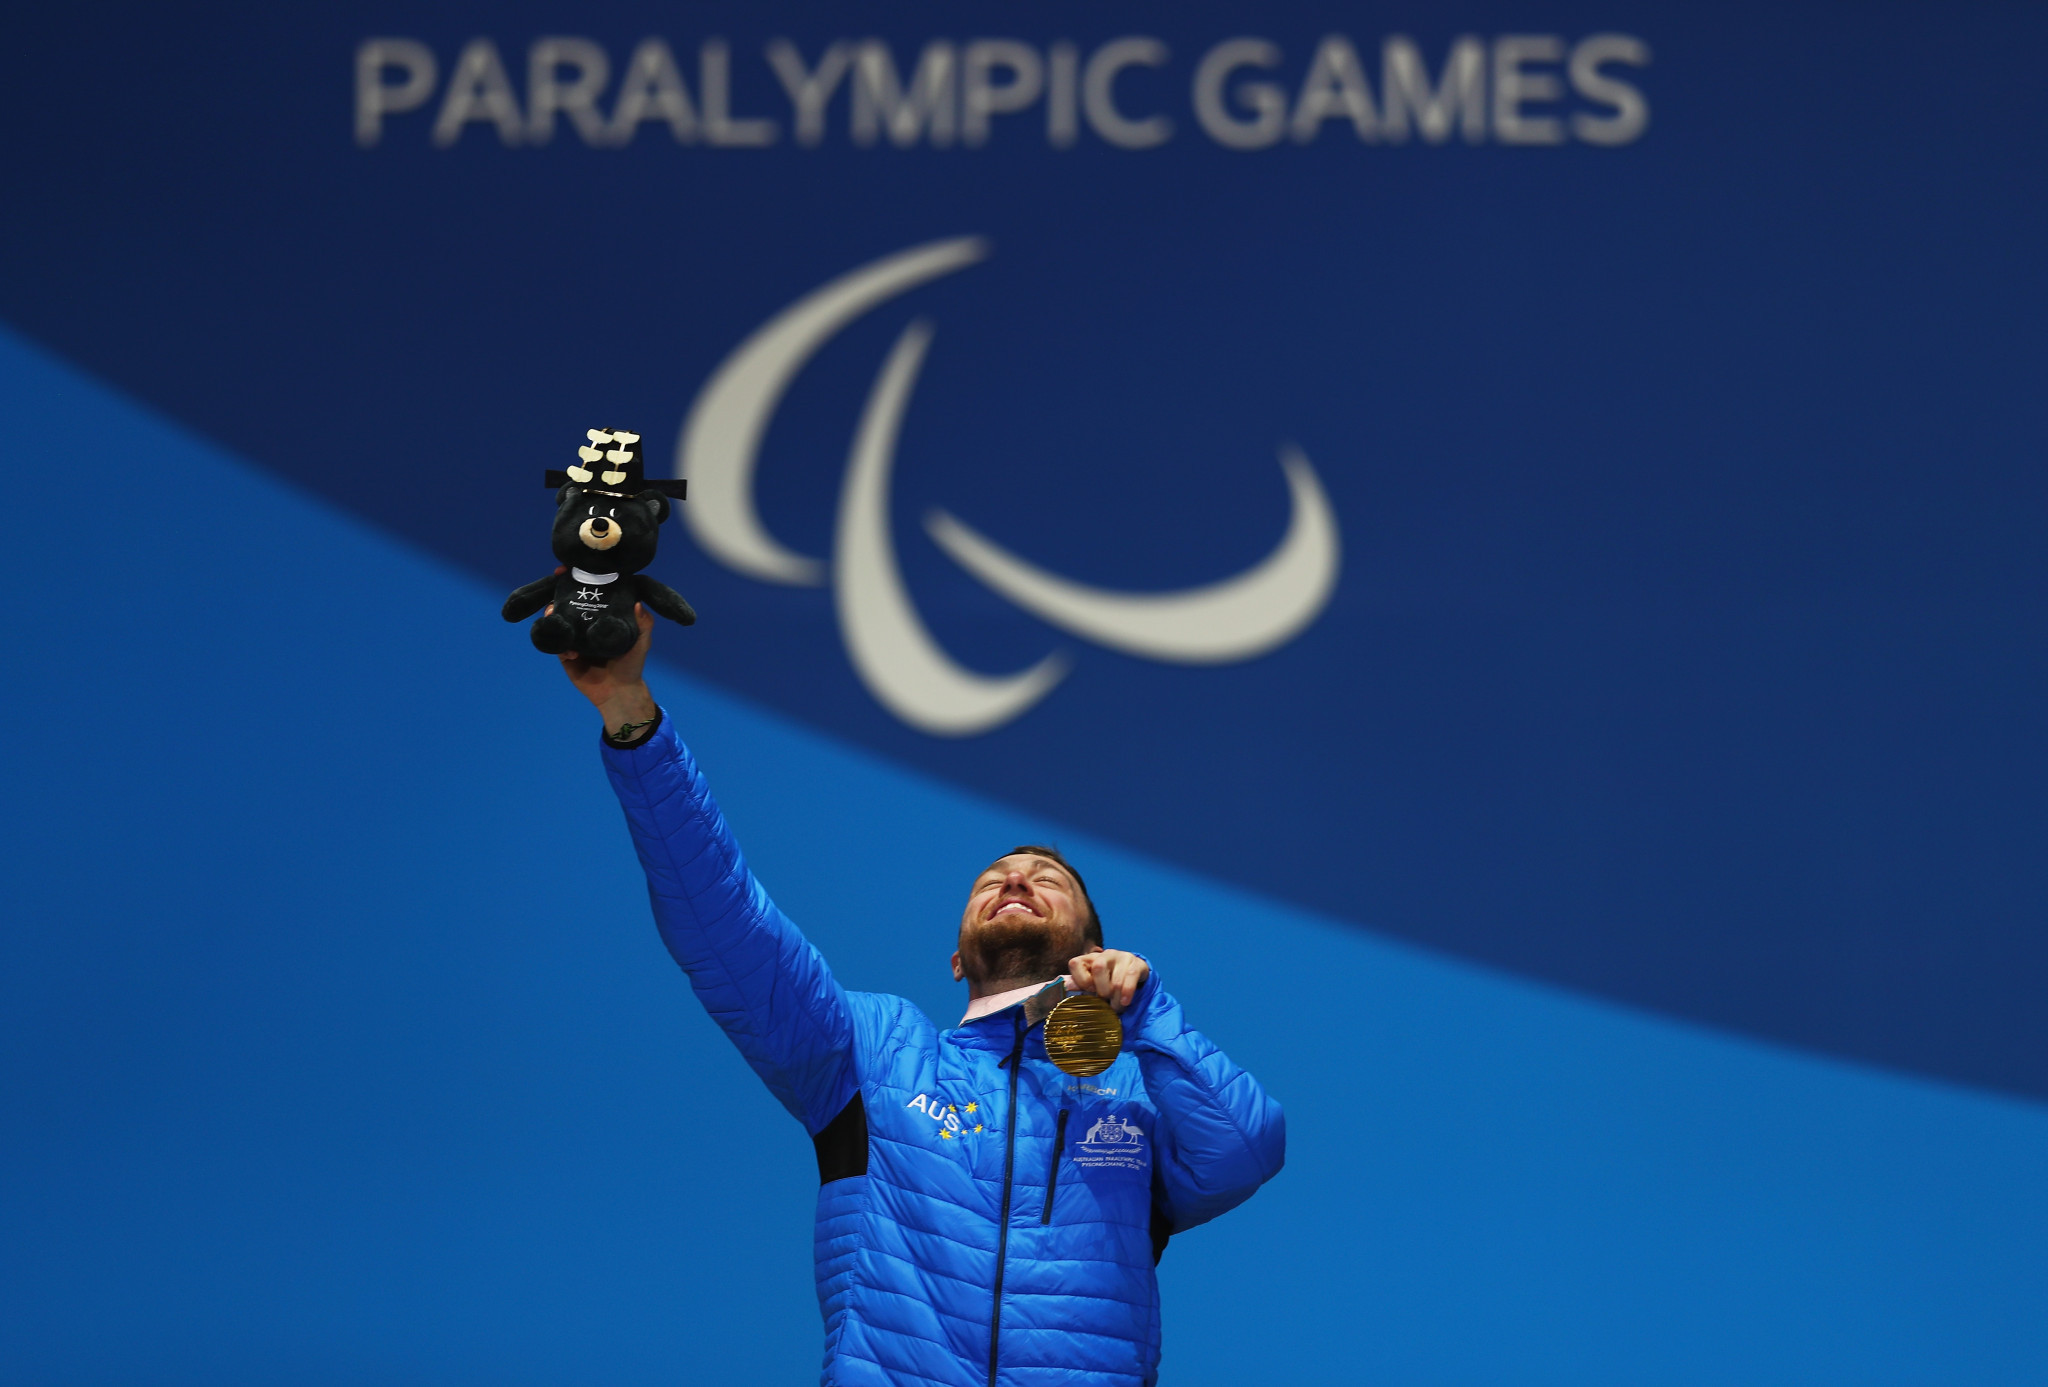 Australia's Simon Patmore won his first Winter Paralympic medal in yesterday's snowboard cross competition ©Getty Images